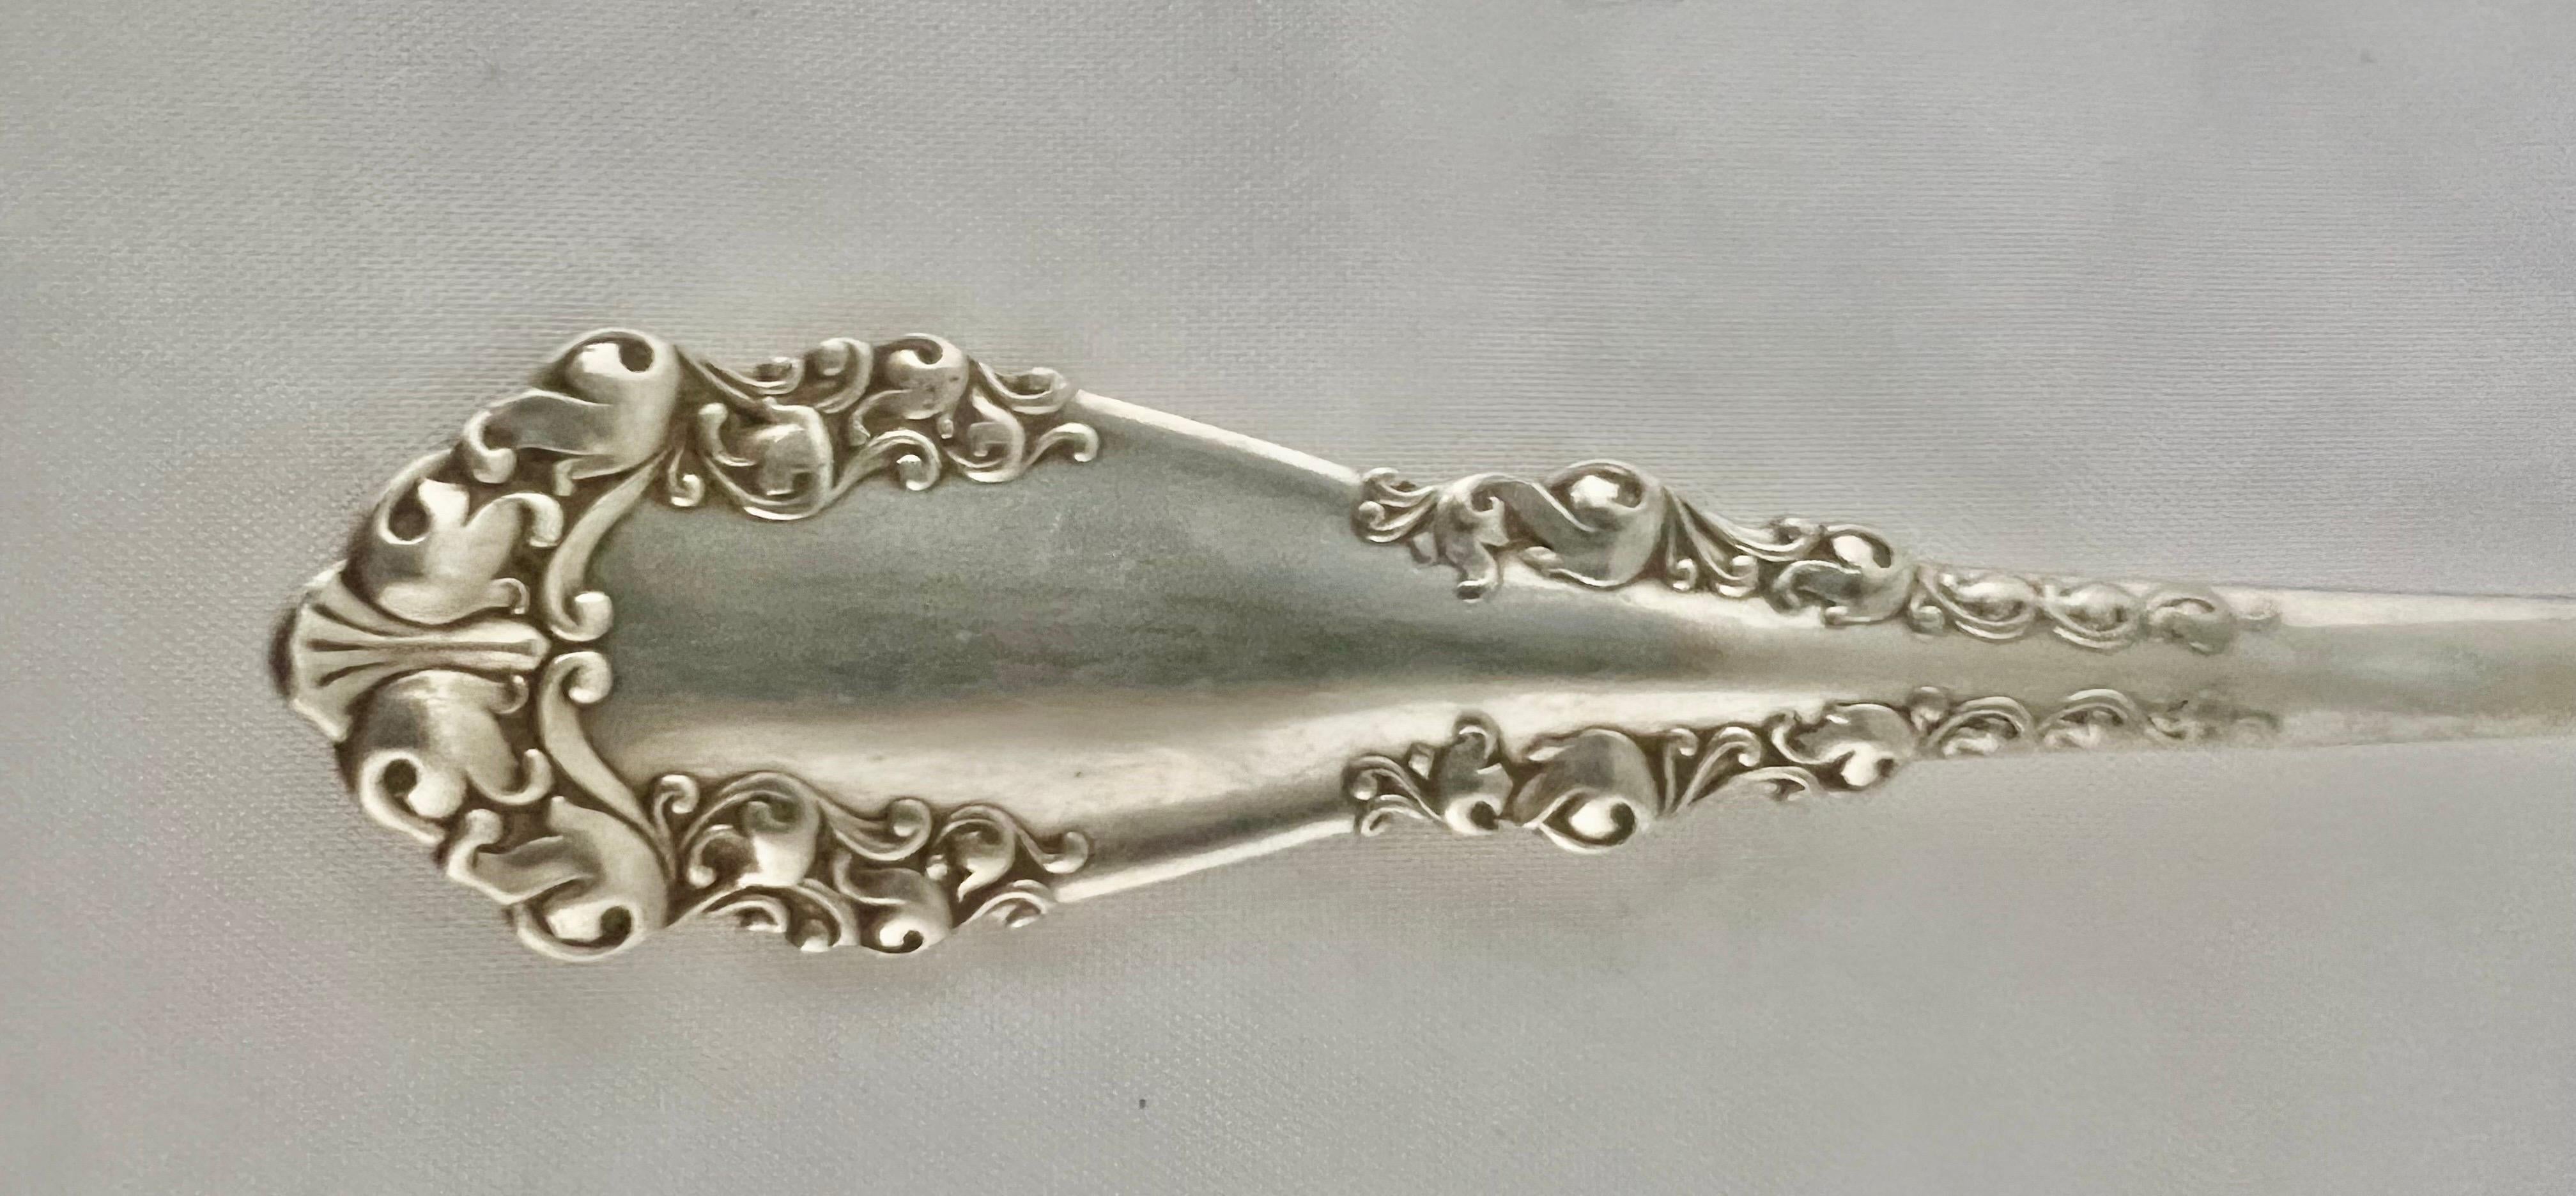 An 1847 Rogers Brothers A1 silver serving spoon that is a collectible item.  This spoon had intricate designs and can hold both historical and aesthetic value.  The silver was manufactured in Meriden, Conn.